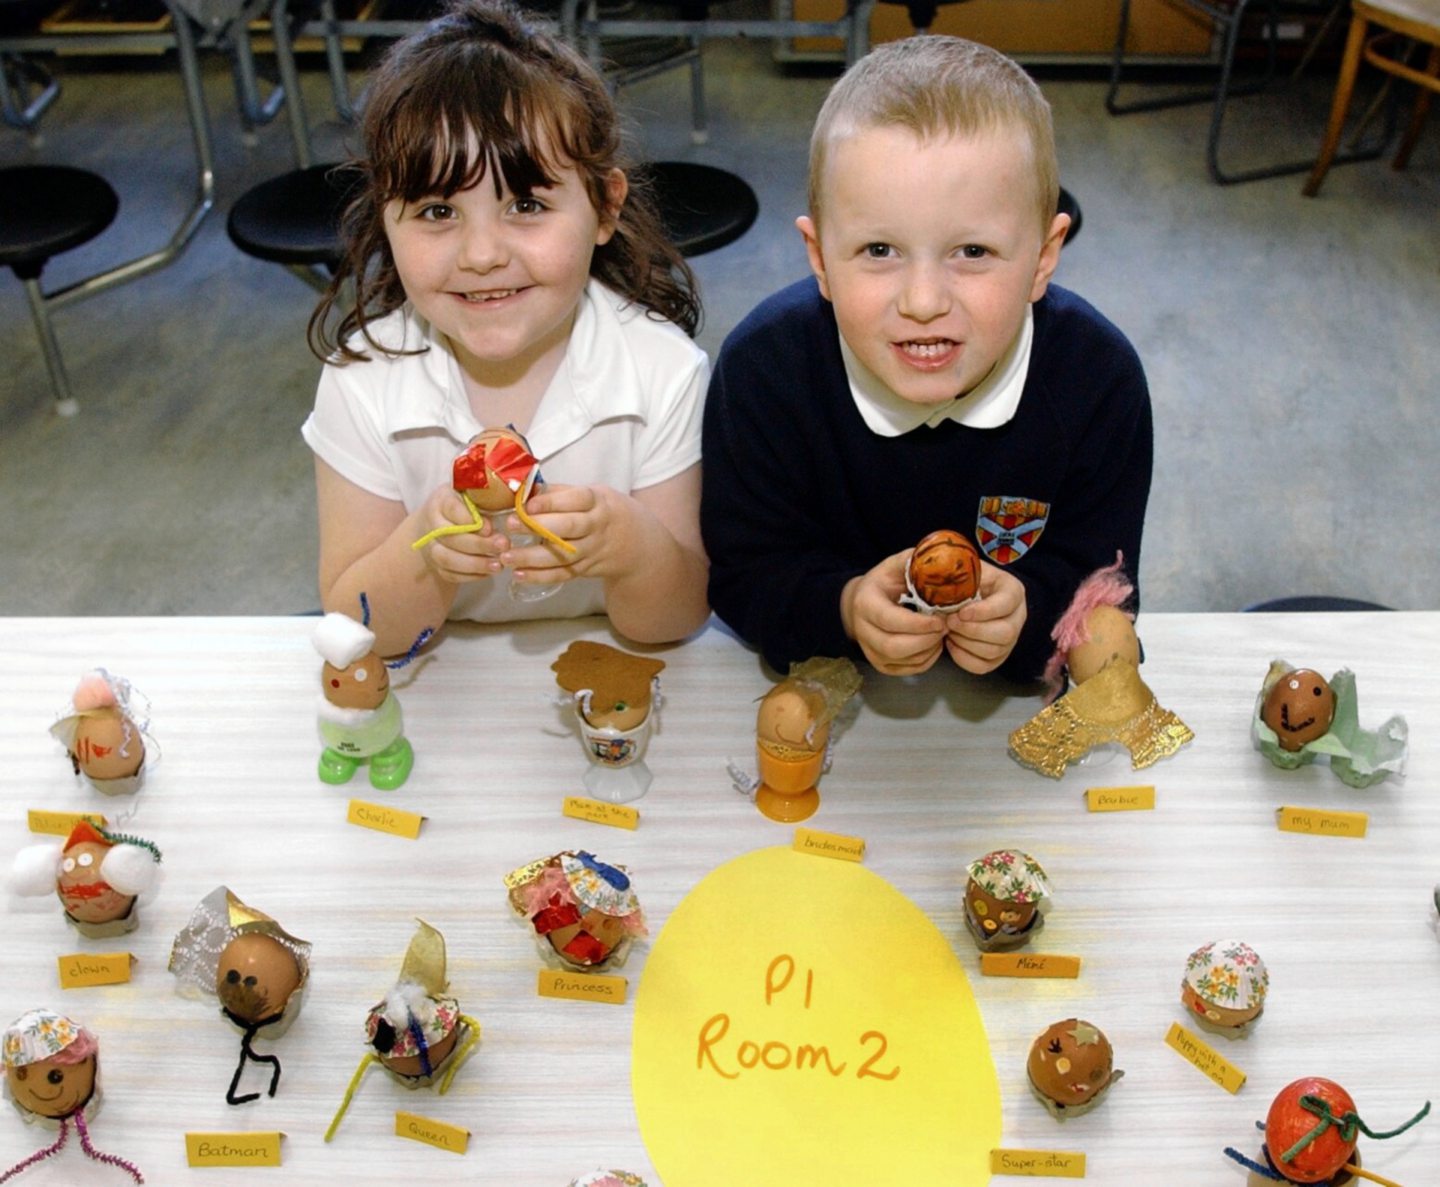 Creative pupils Rebecca Felber and Ross William with the Easter eggs they designed for a school competition in 2003.